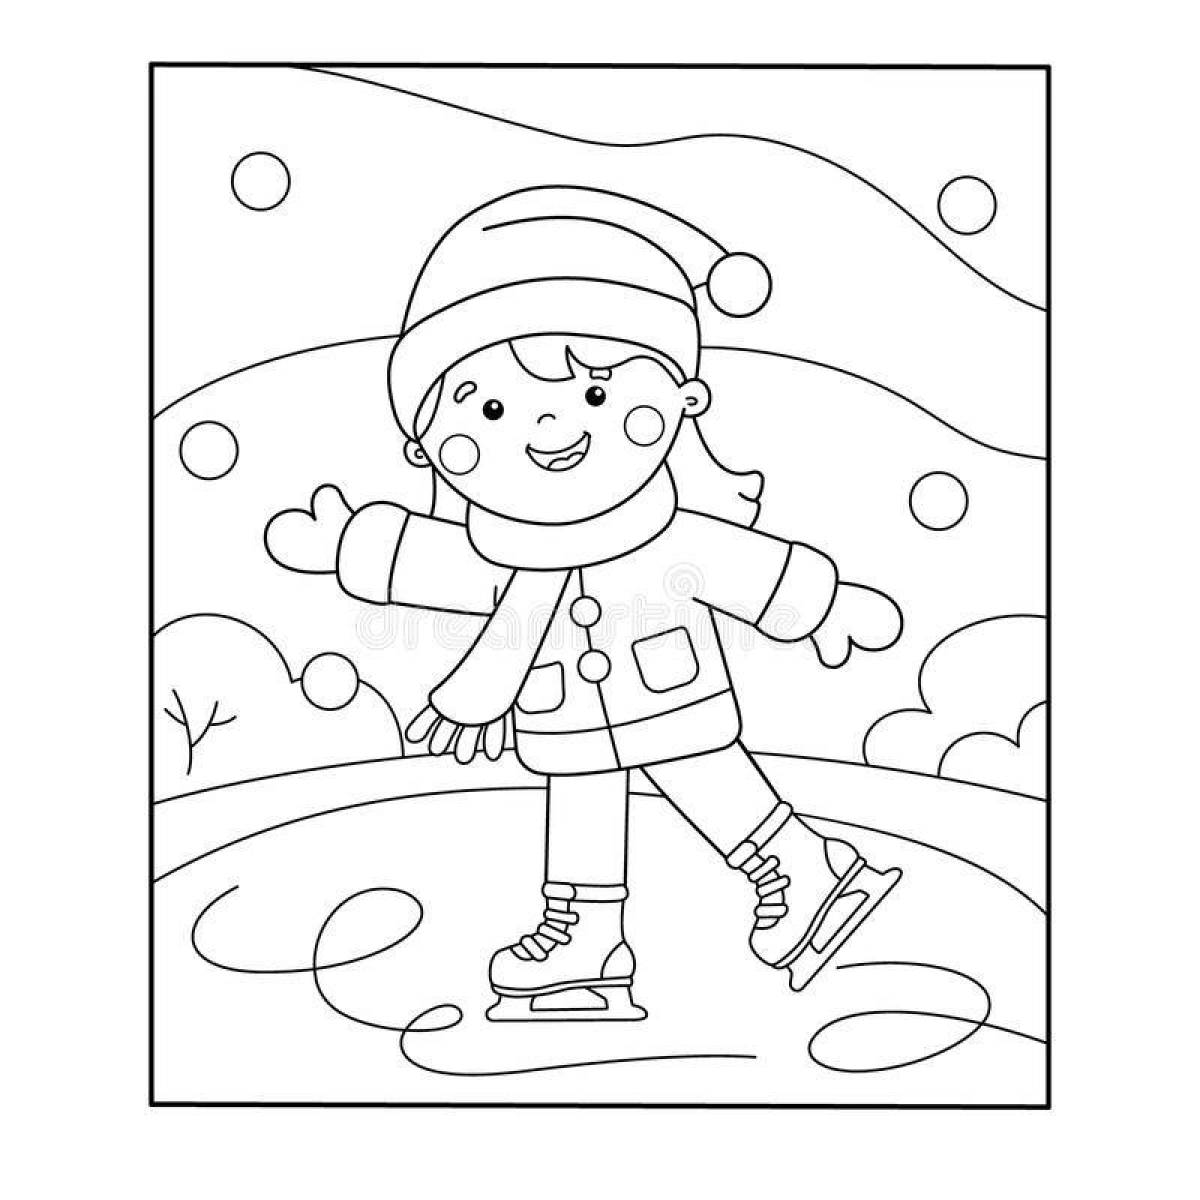 Playful winter sports coloring page for 6-7 year olds